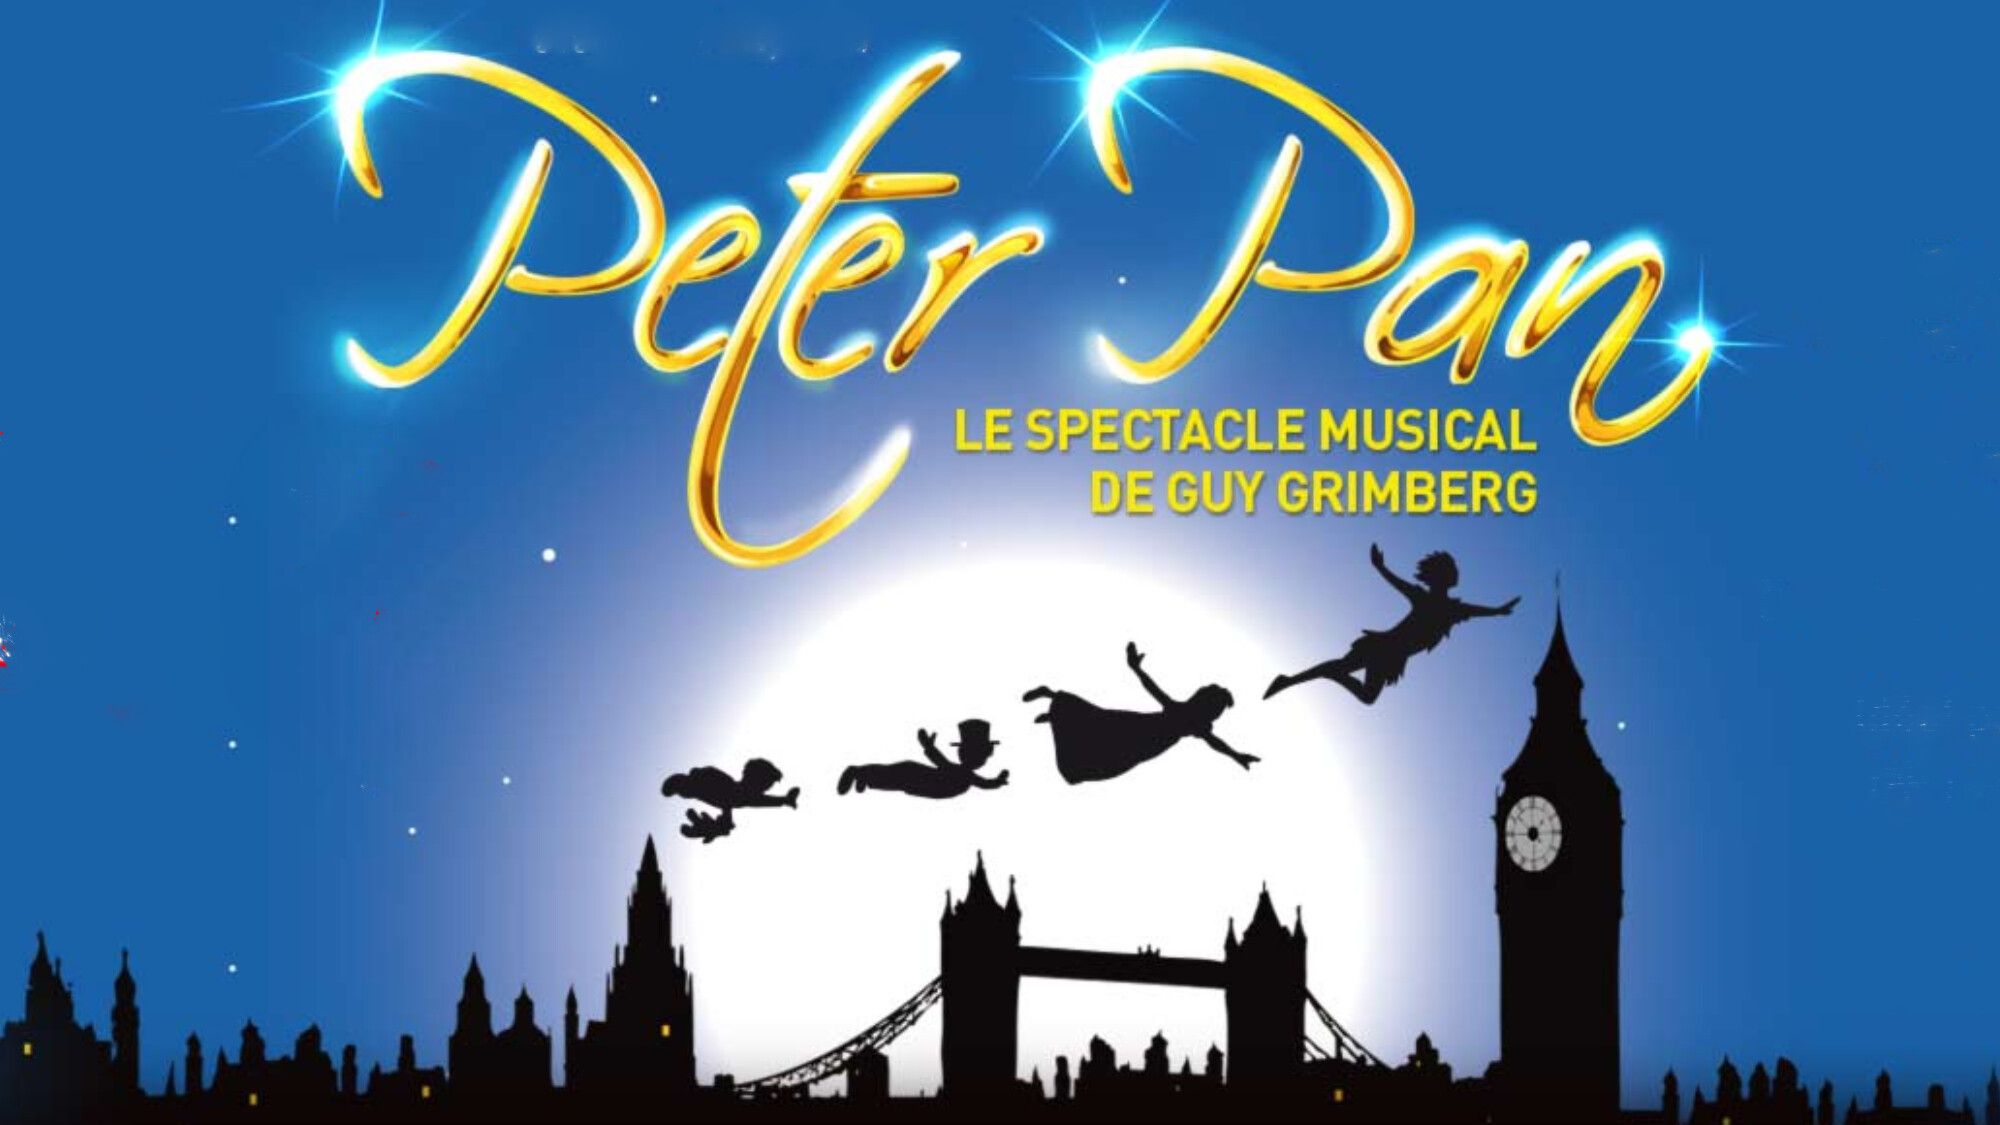 Peter Pan, le Spectacle Musical at Bobino Tickets